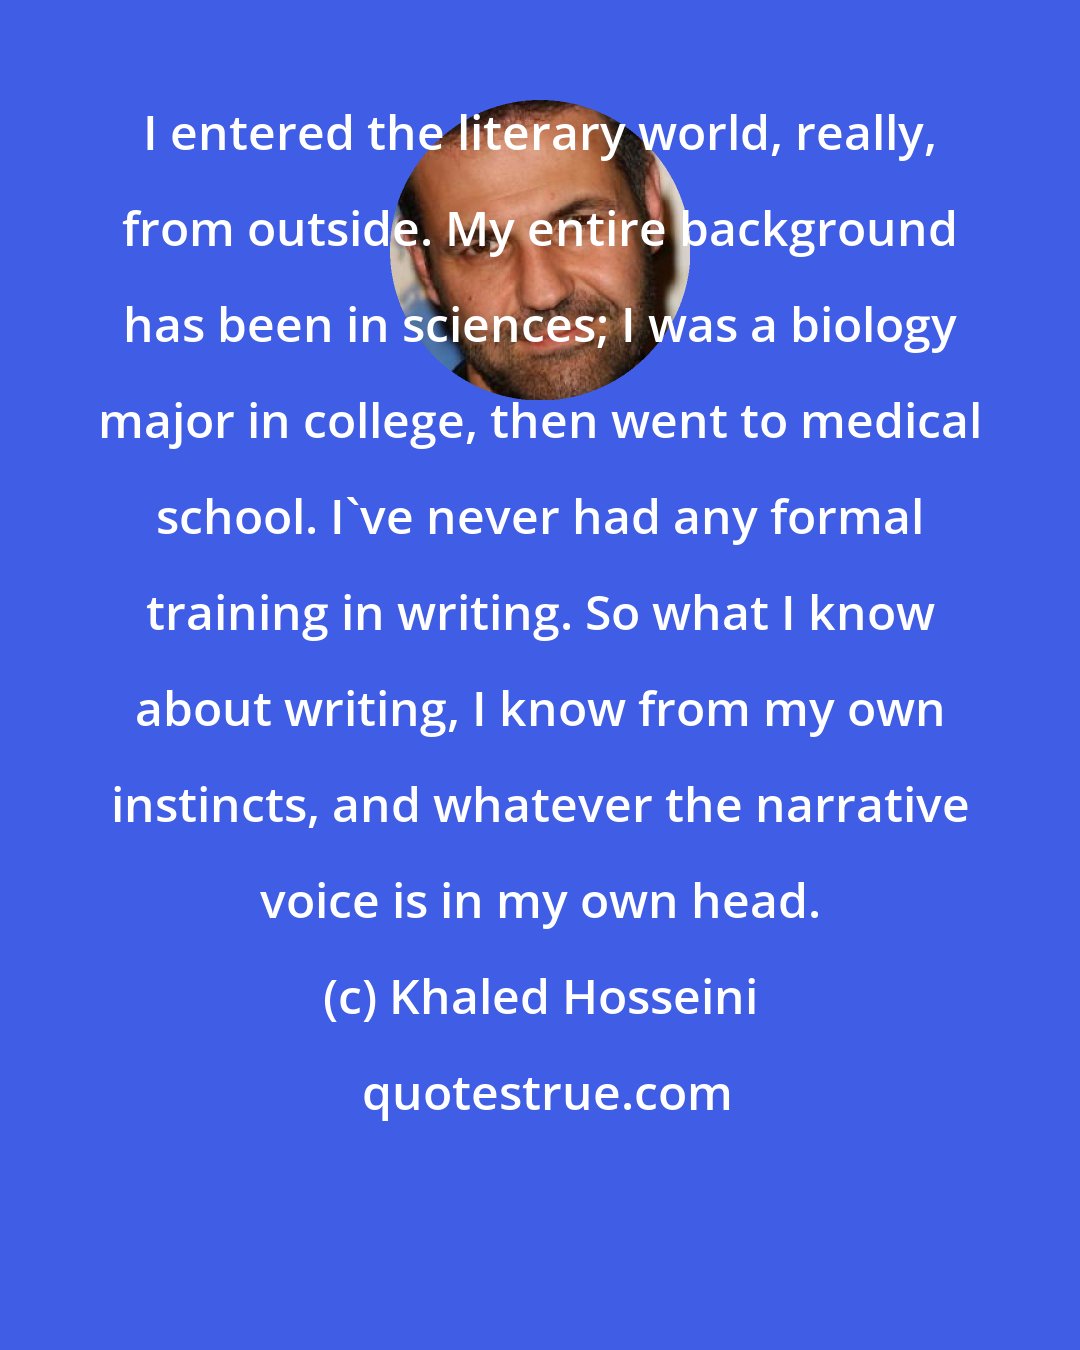 Khaled Hosseini: I entered the literary world, really, from outside. My entire background has been in sciences; I was a biology major in college, then went to medical school. I've never had any formal training in writing. So what I know about writing, I know from my own instincts, and whatever the narrative voice is in my own head.